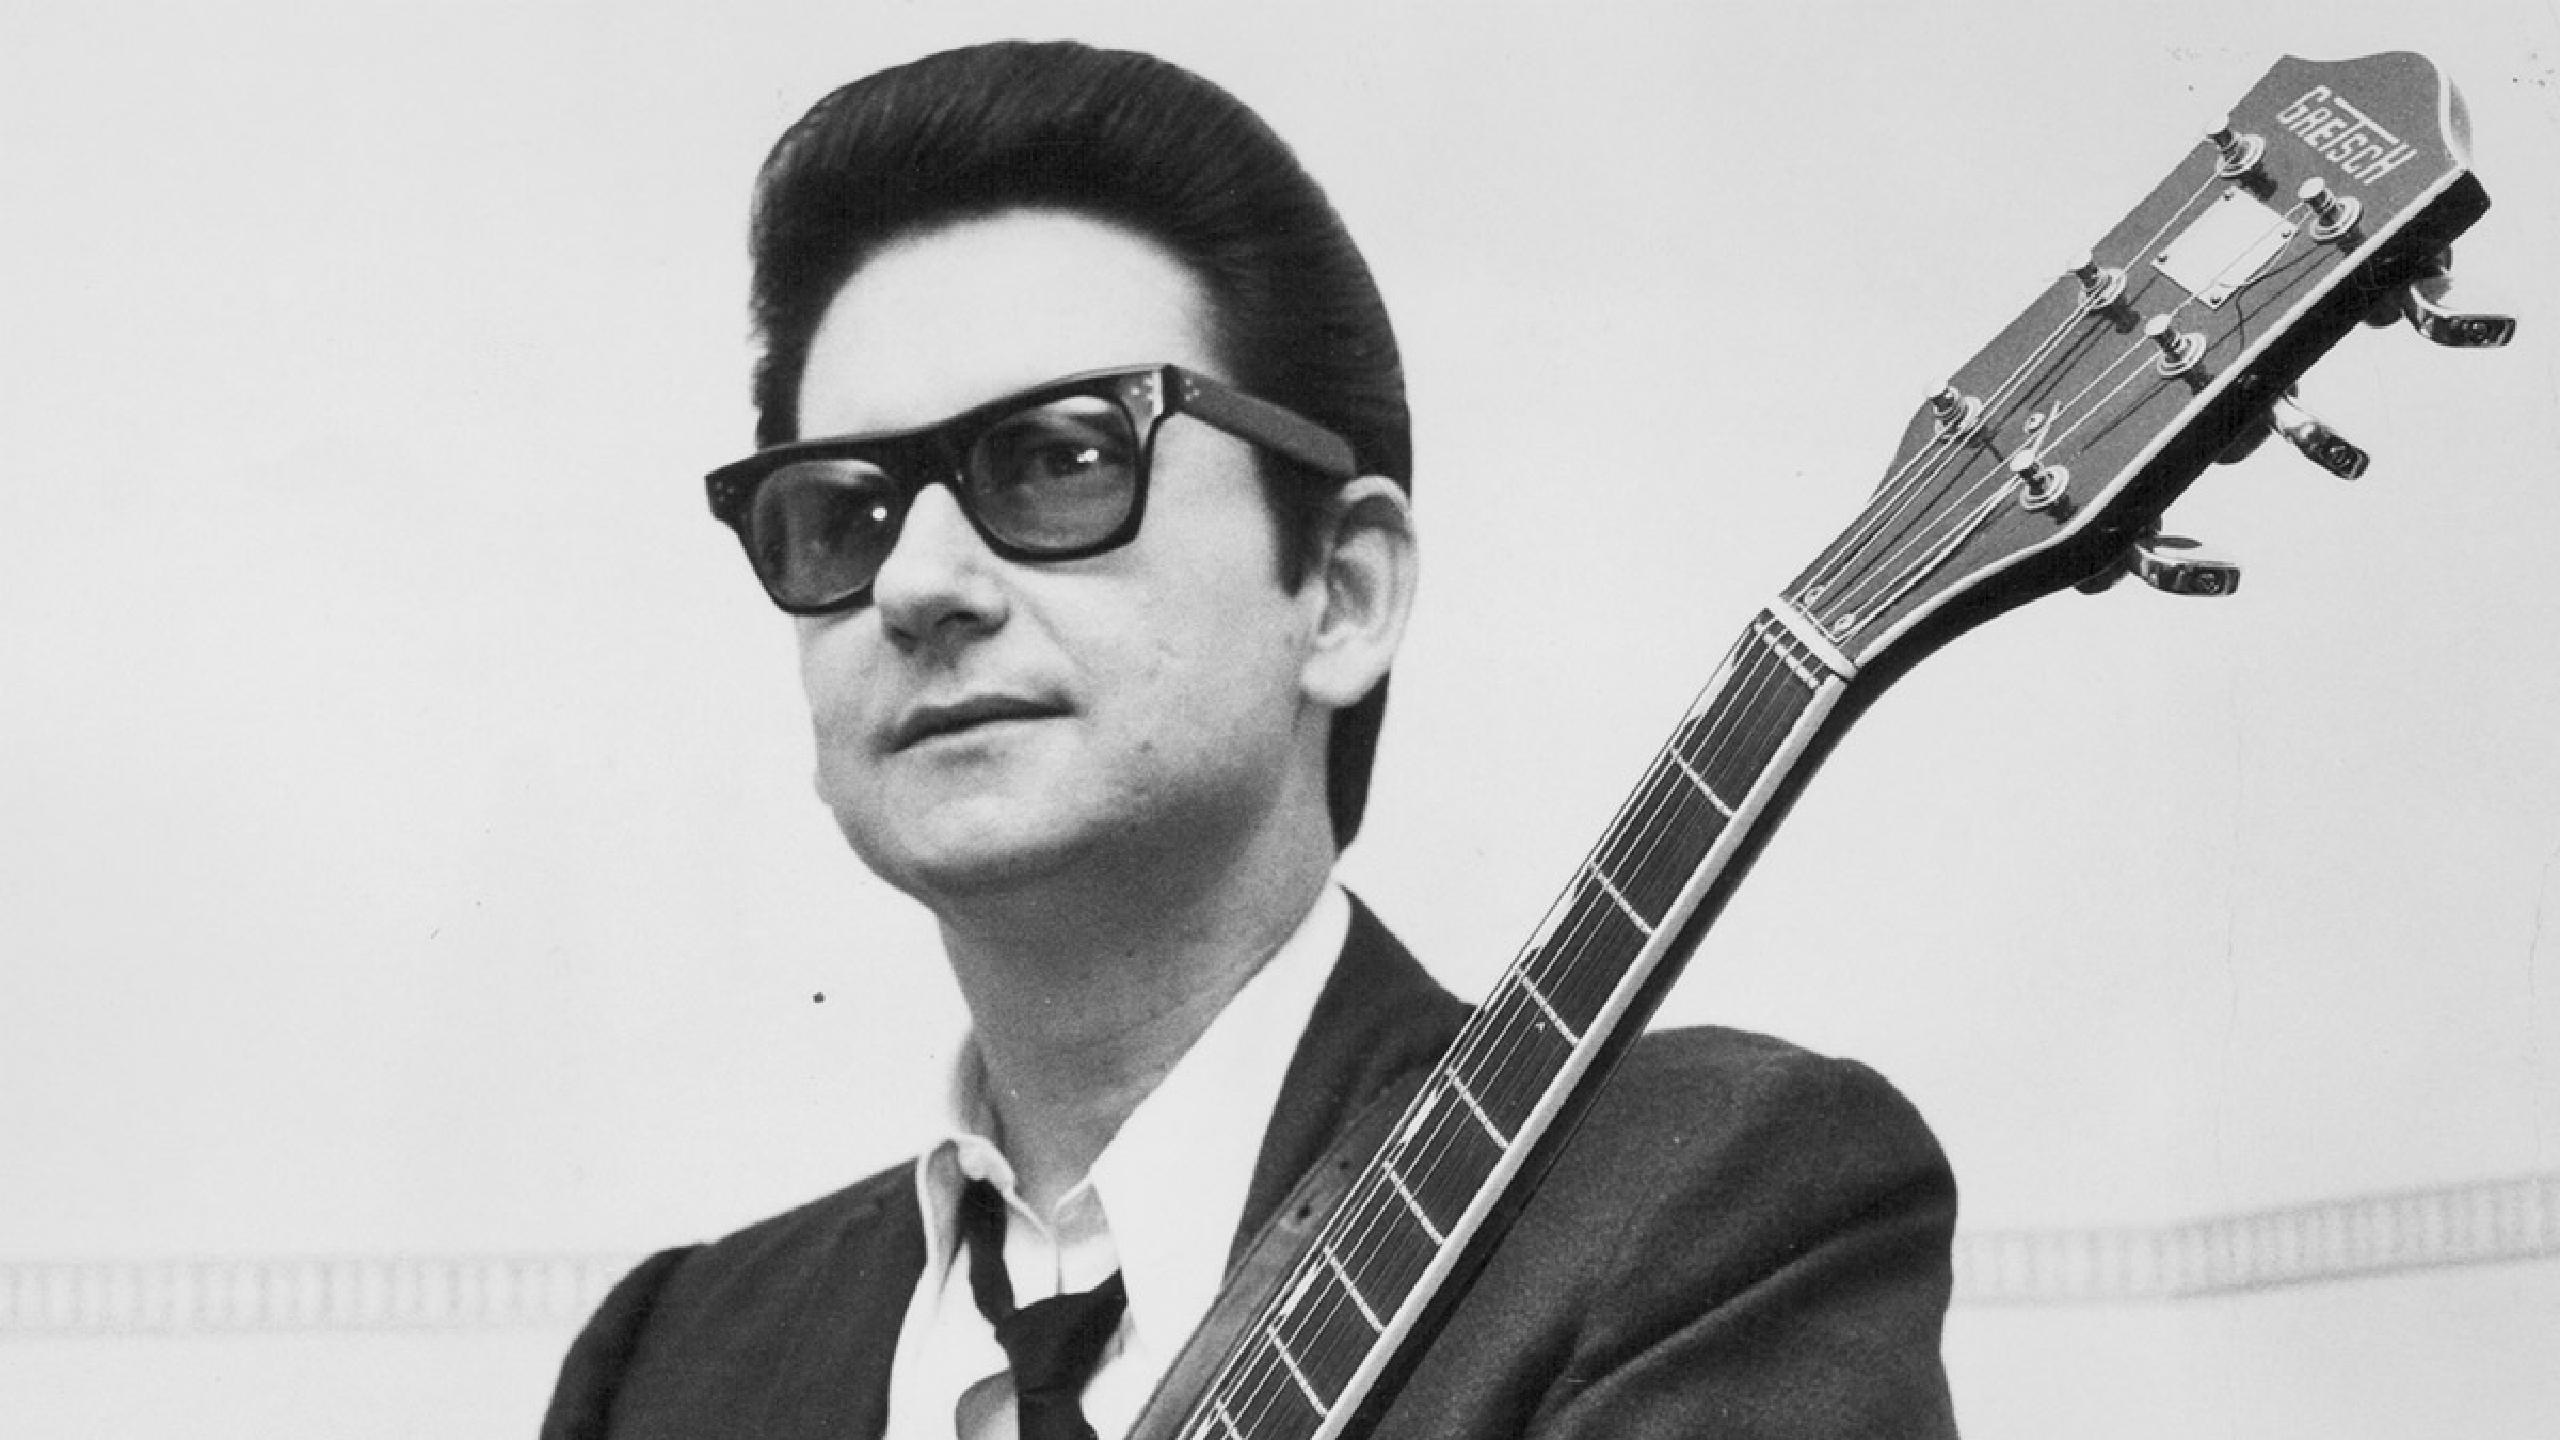 Roy Orbison tour dates 2019 2020. Roy Orbison tickets and concerts